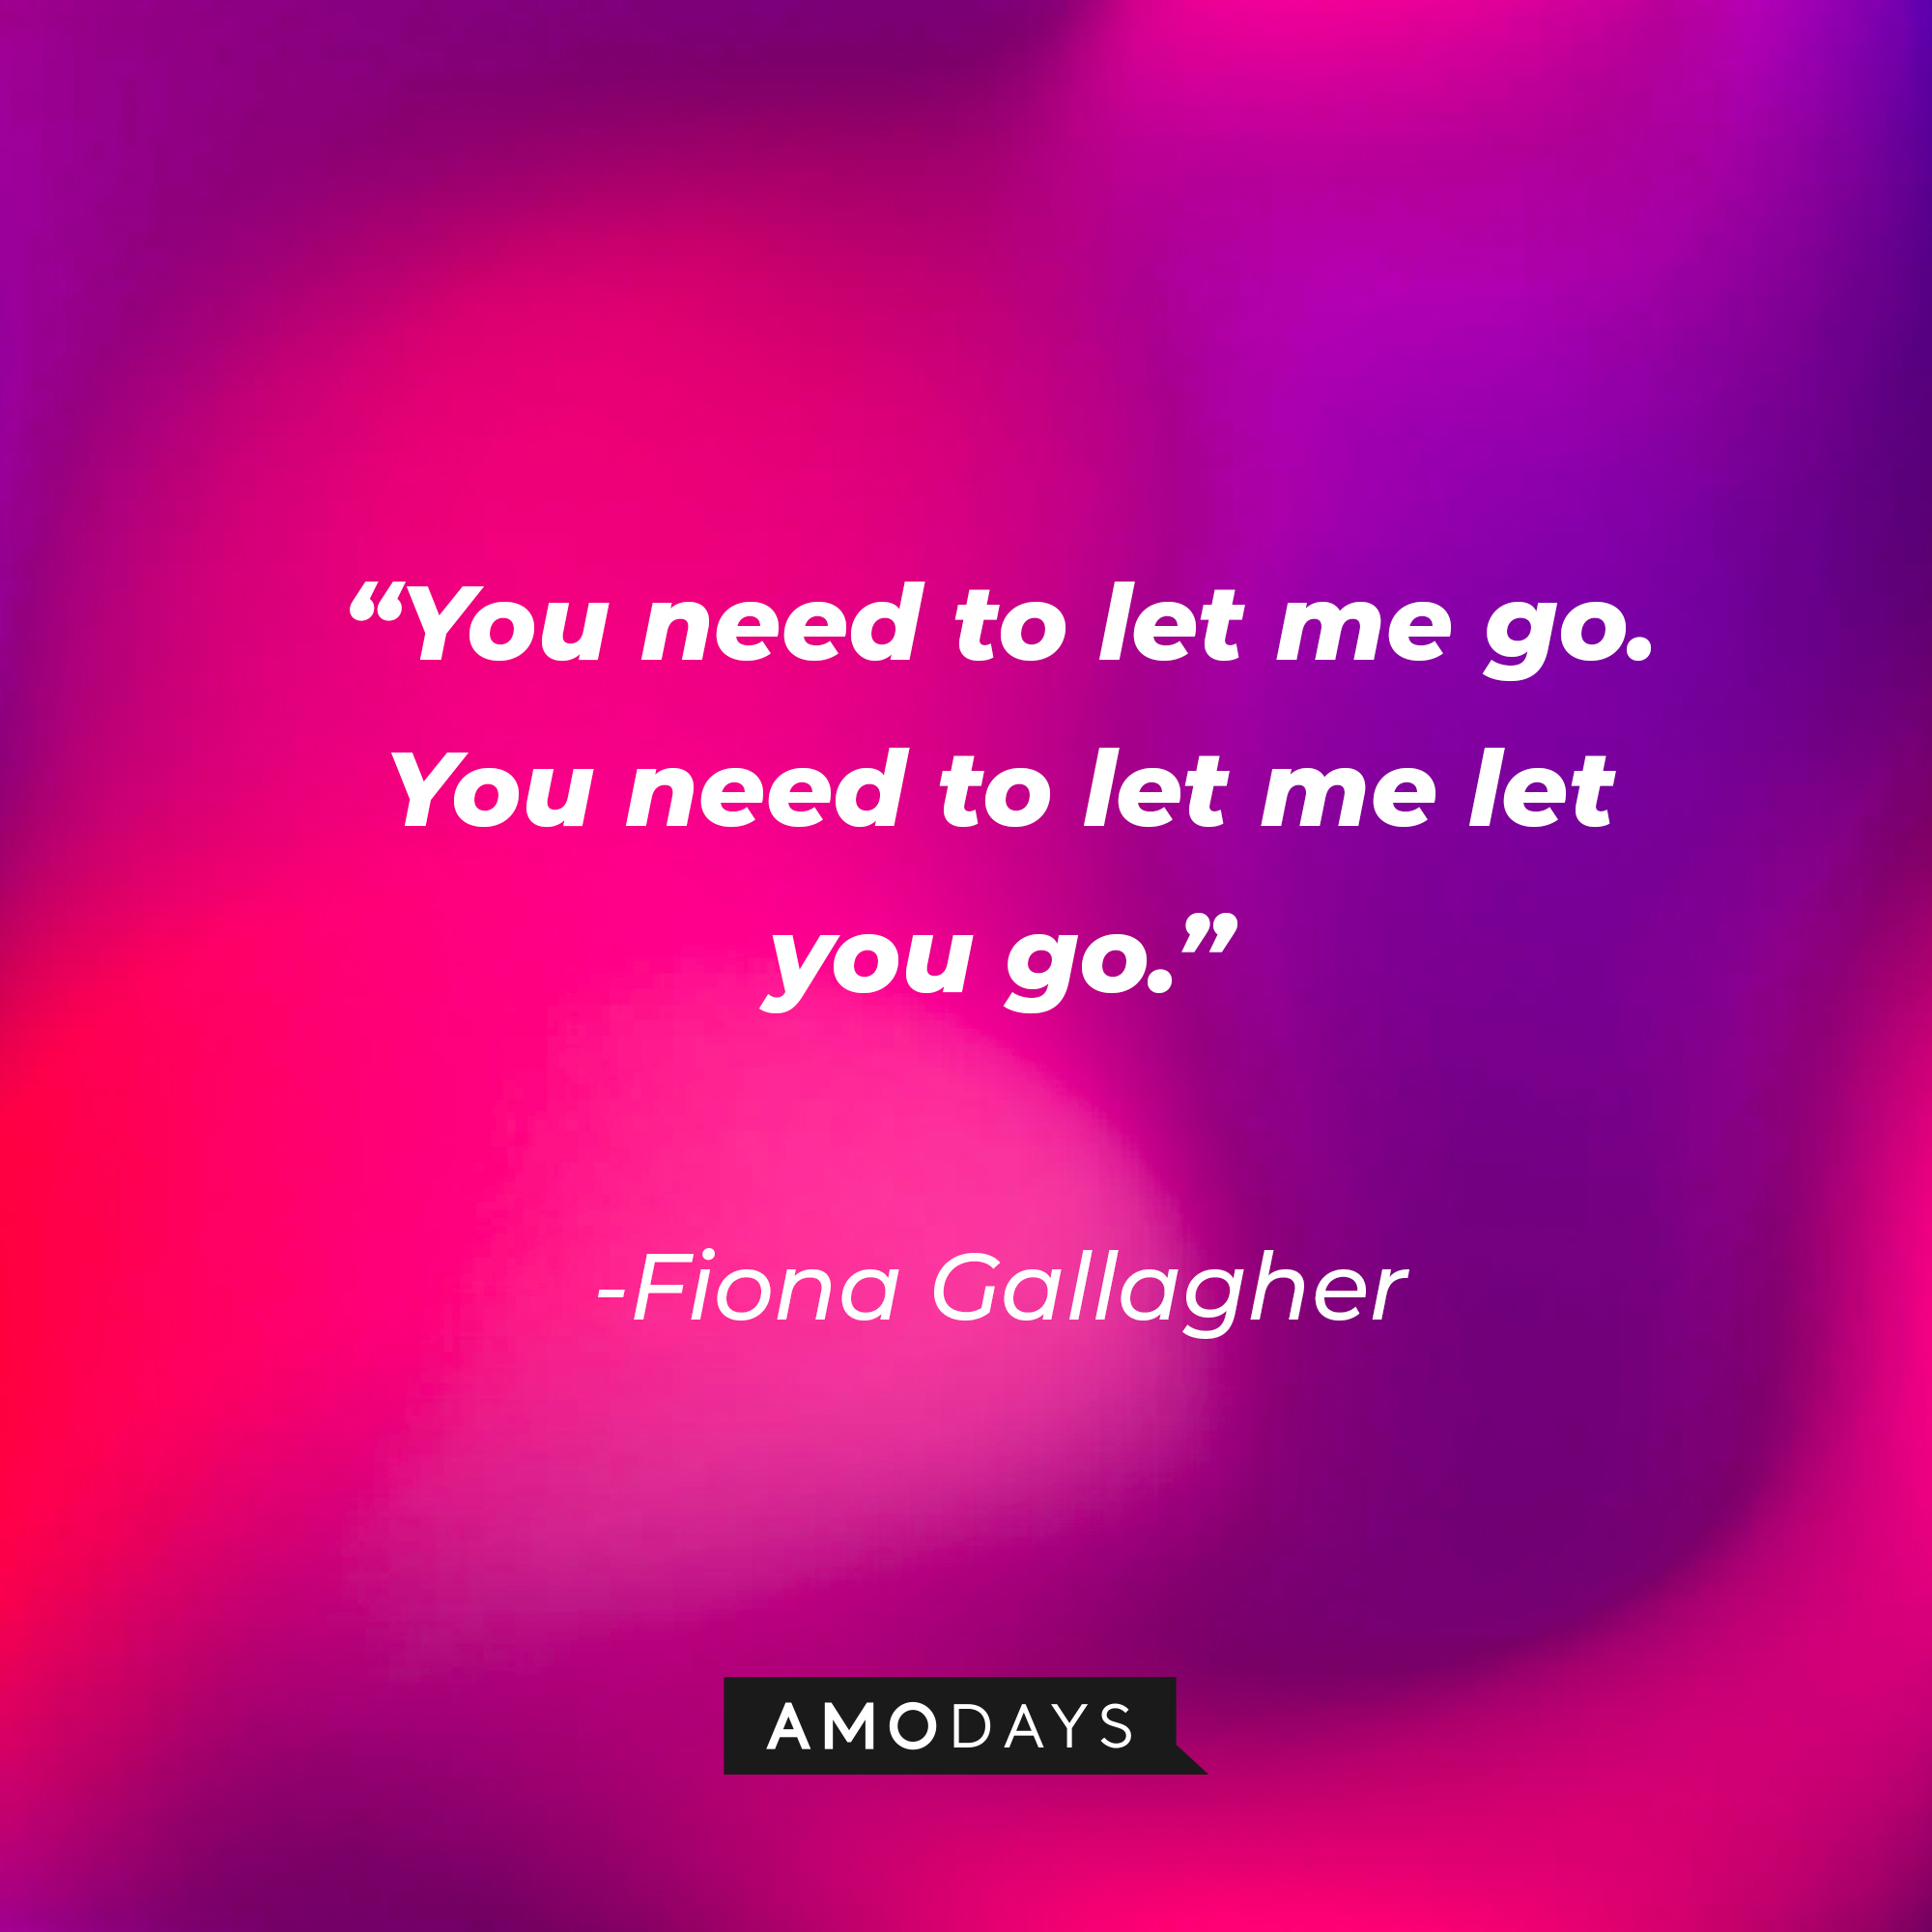 Fiona Gallagher’s quote: “You need to let me go. You need to let me let you go.” | Source: AmoDays